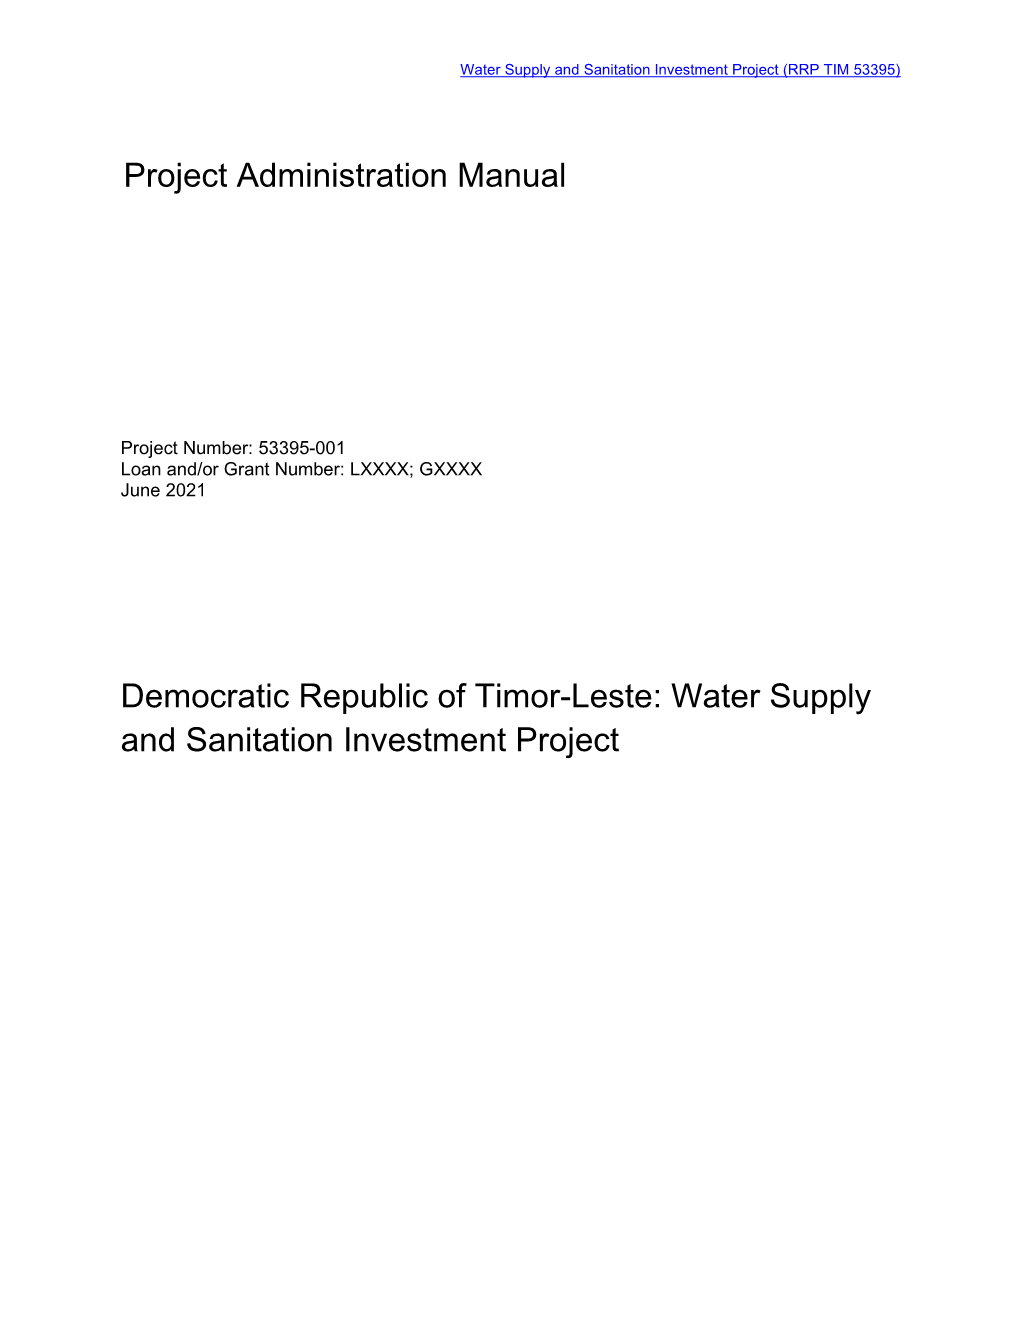 Water Supply and Sanitation Investment Project: Project